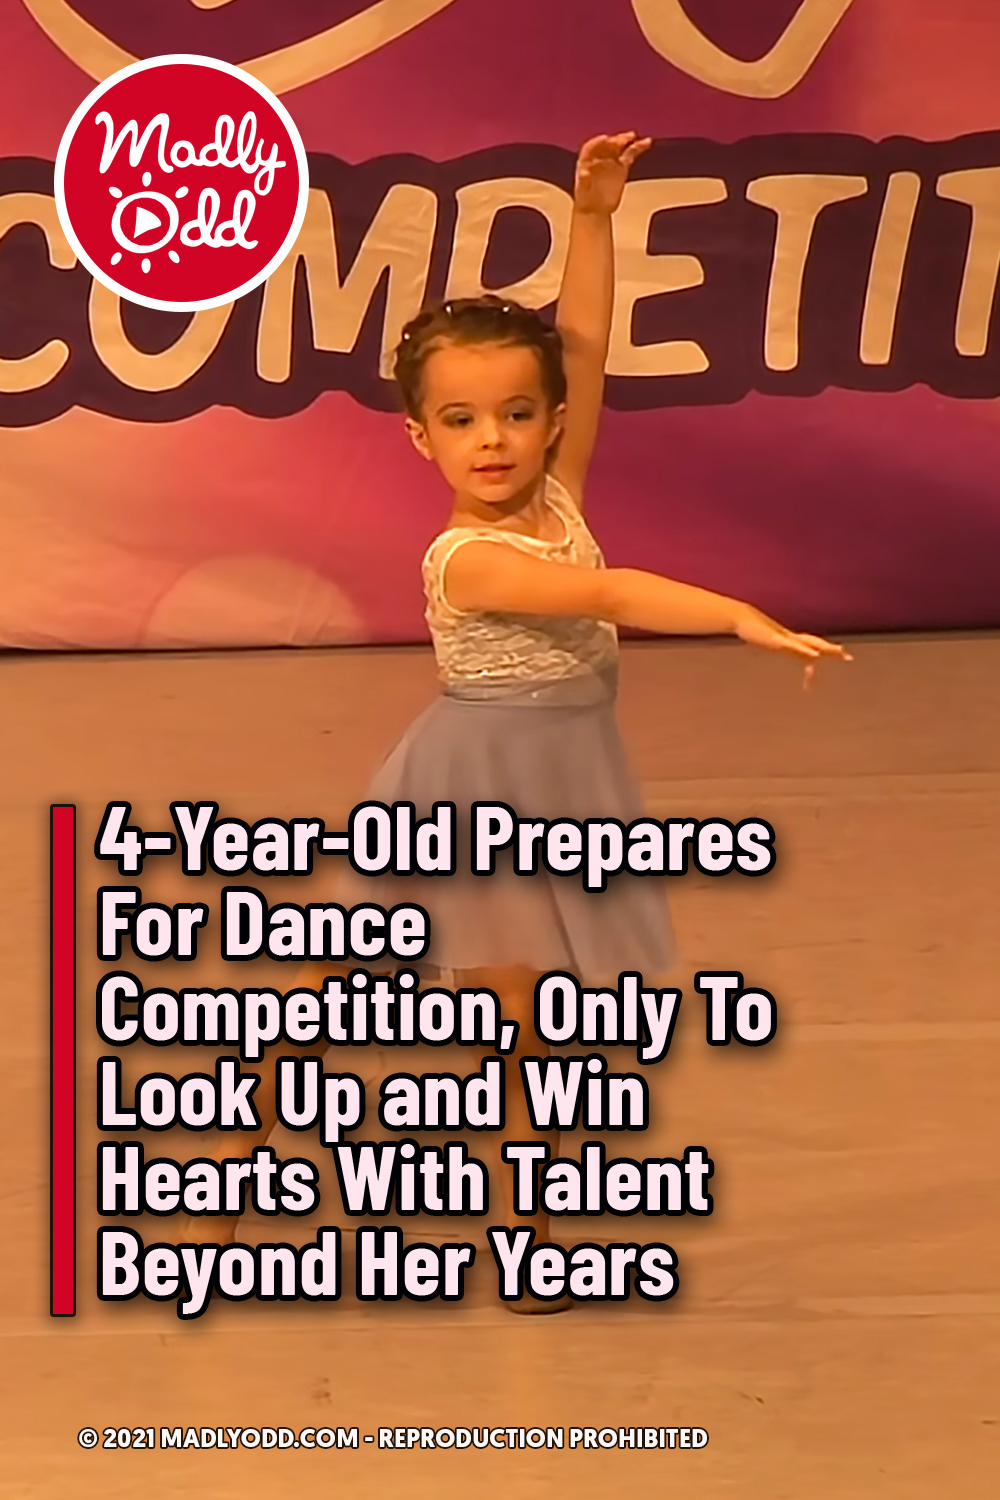 4-Year-Old Prepares For Dance Competition, Only To Look Up and Win Hearts With Talent Beyond Her Years